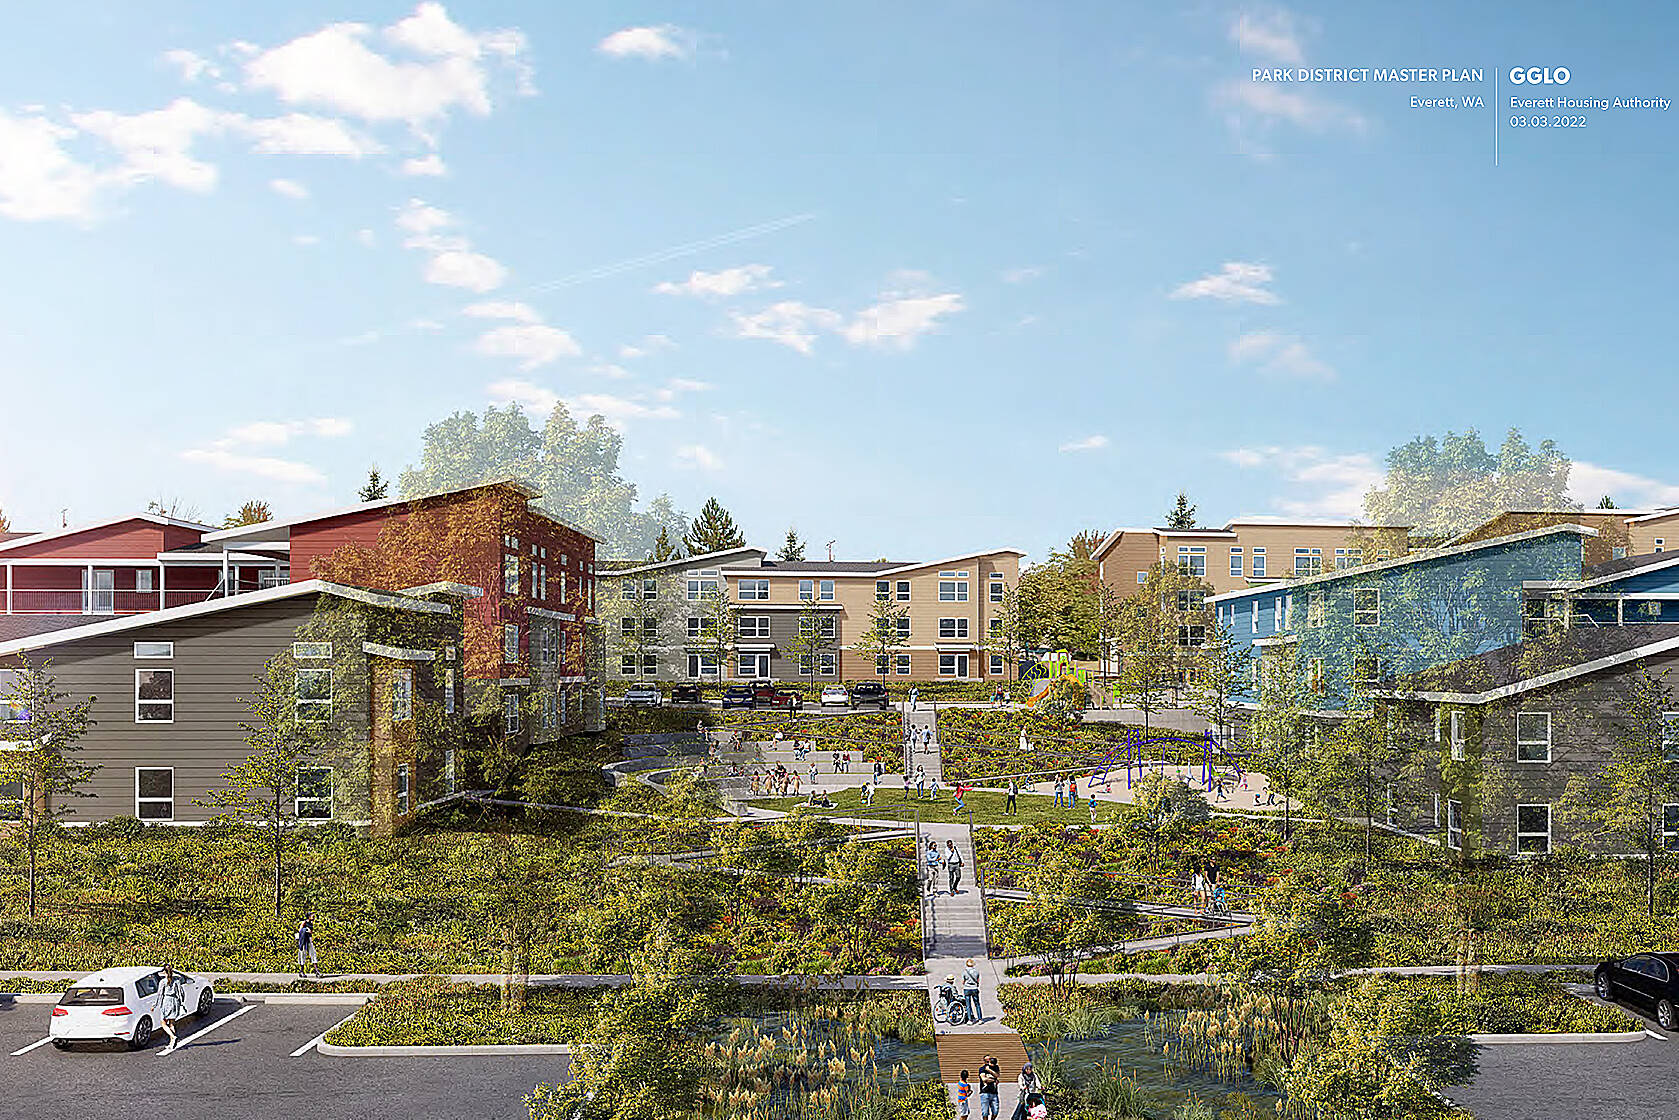 A rendering of the Park District mixed-income and mixed-use housing development proposed by the Everett Housing Authority shows its tiered layout with shorter buildings on the property's exterior and taller ones in the interior. (Everett Housing Authority)